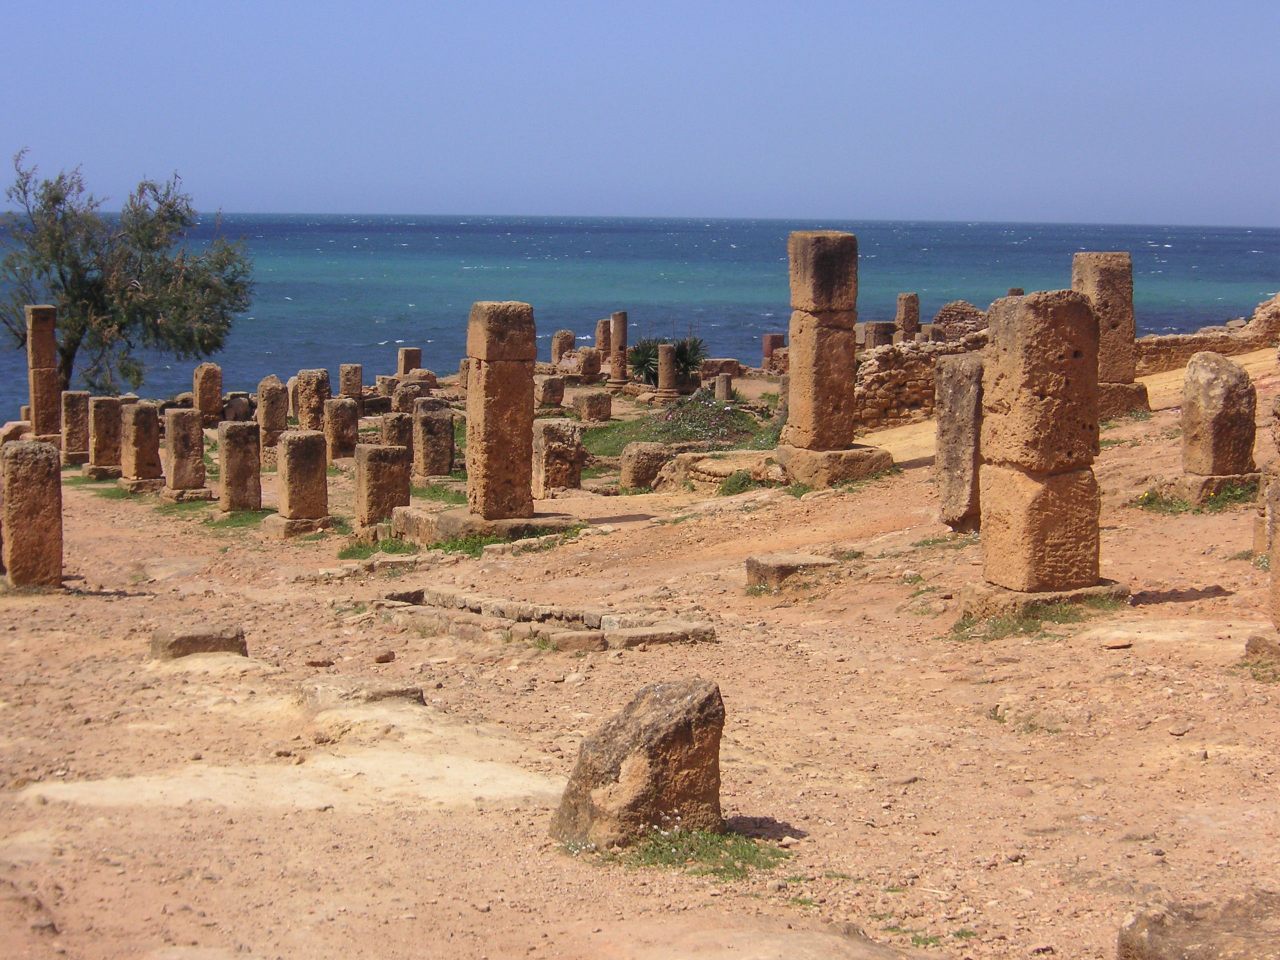 Rows of surviving column bases hint at the scale of Algeria's ancient site of Tipasa